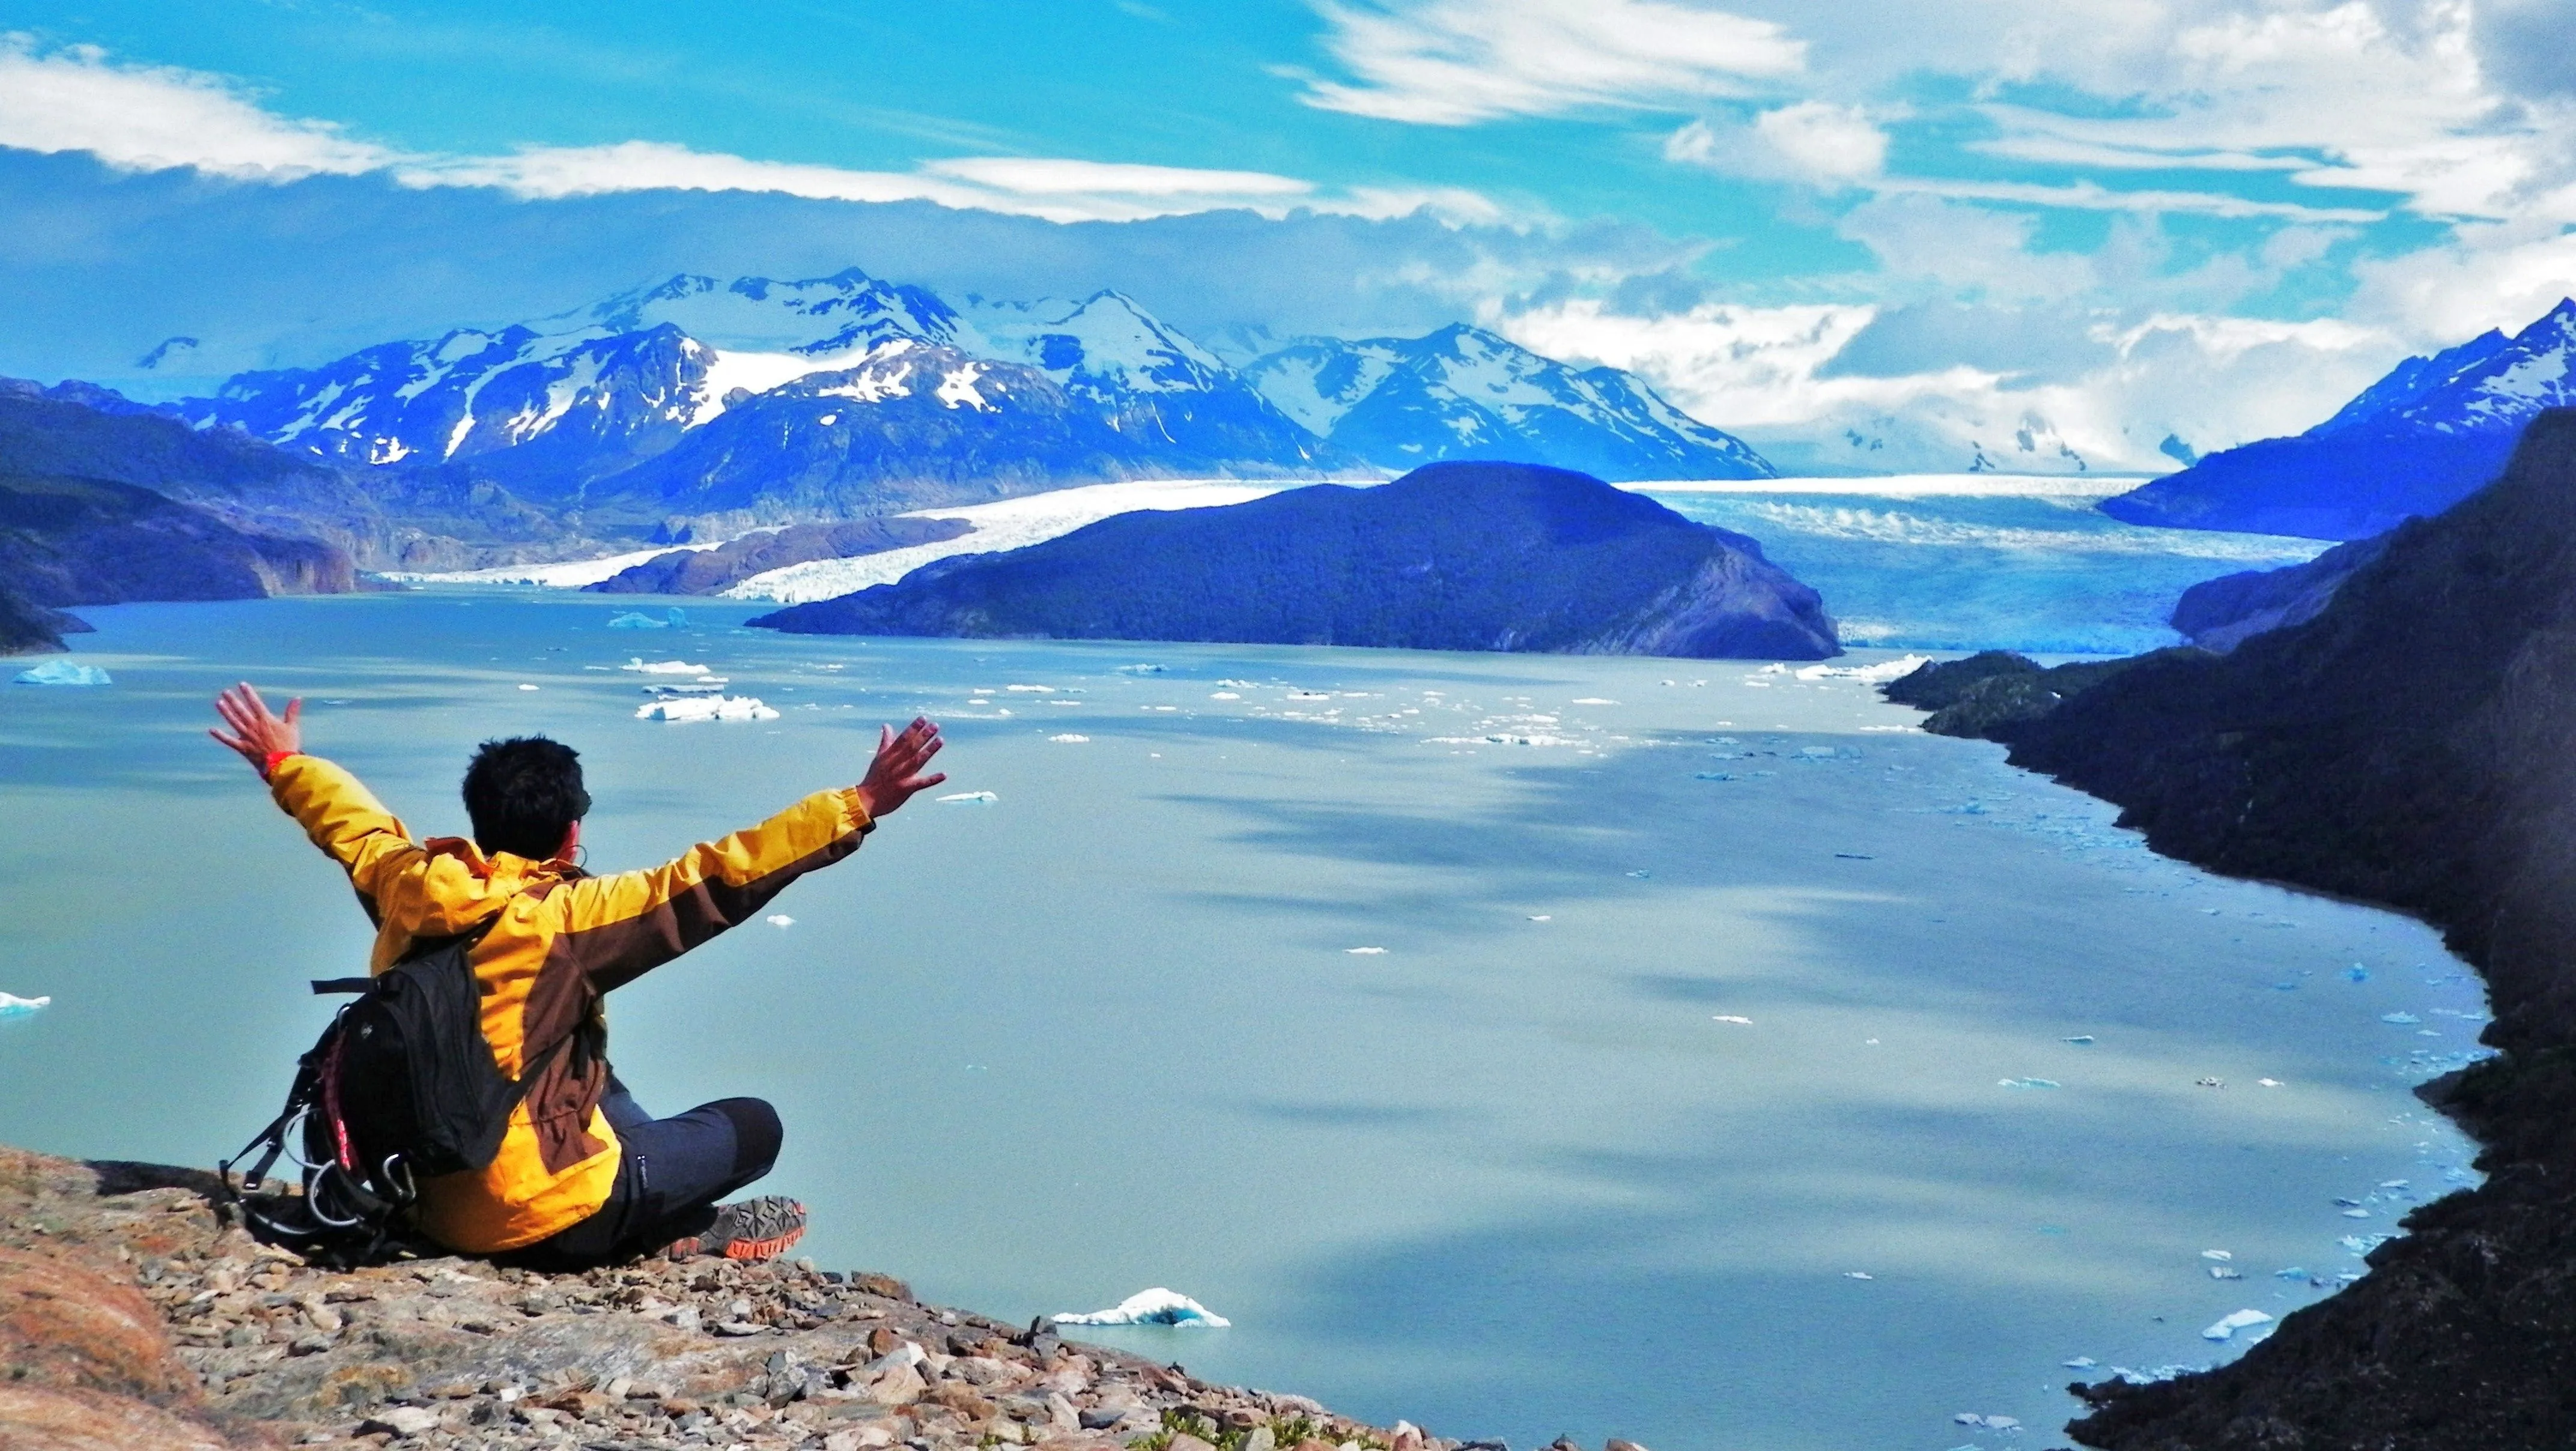 Grey Lake Viewpoint in Chile, South America | Observation Decks - Rated 4